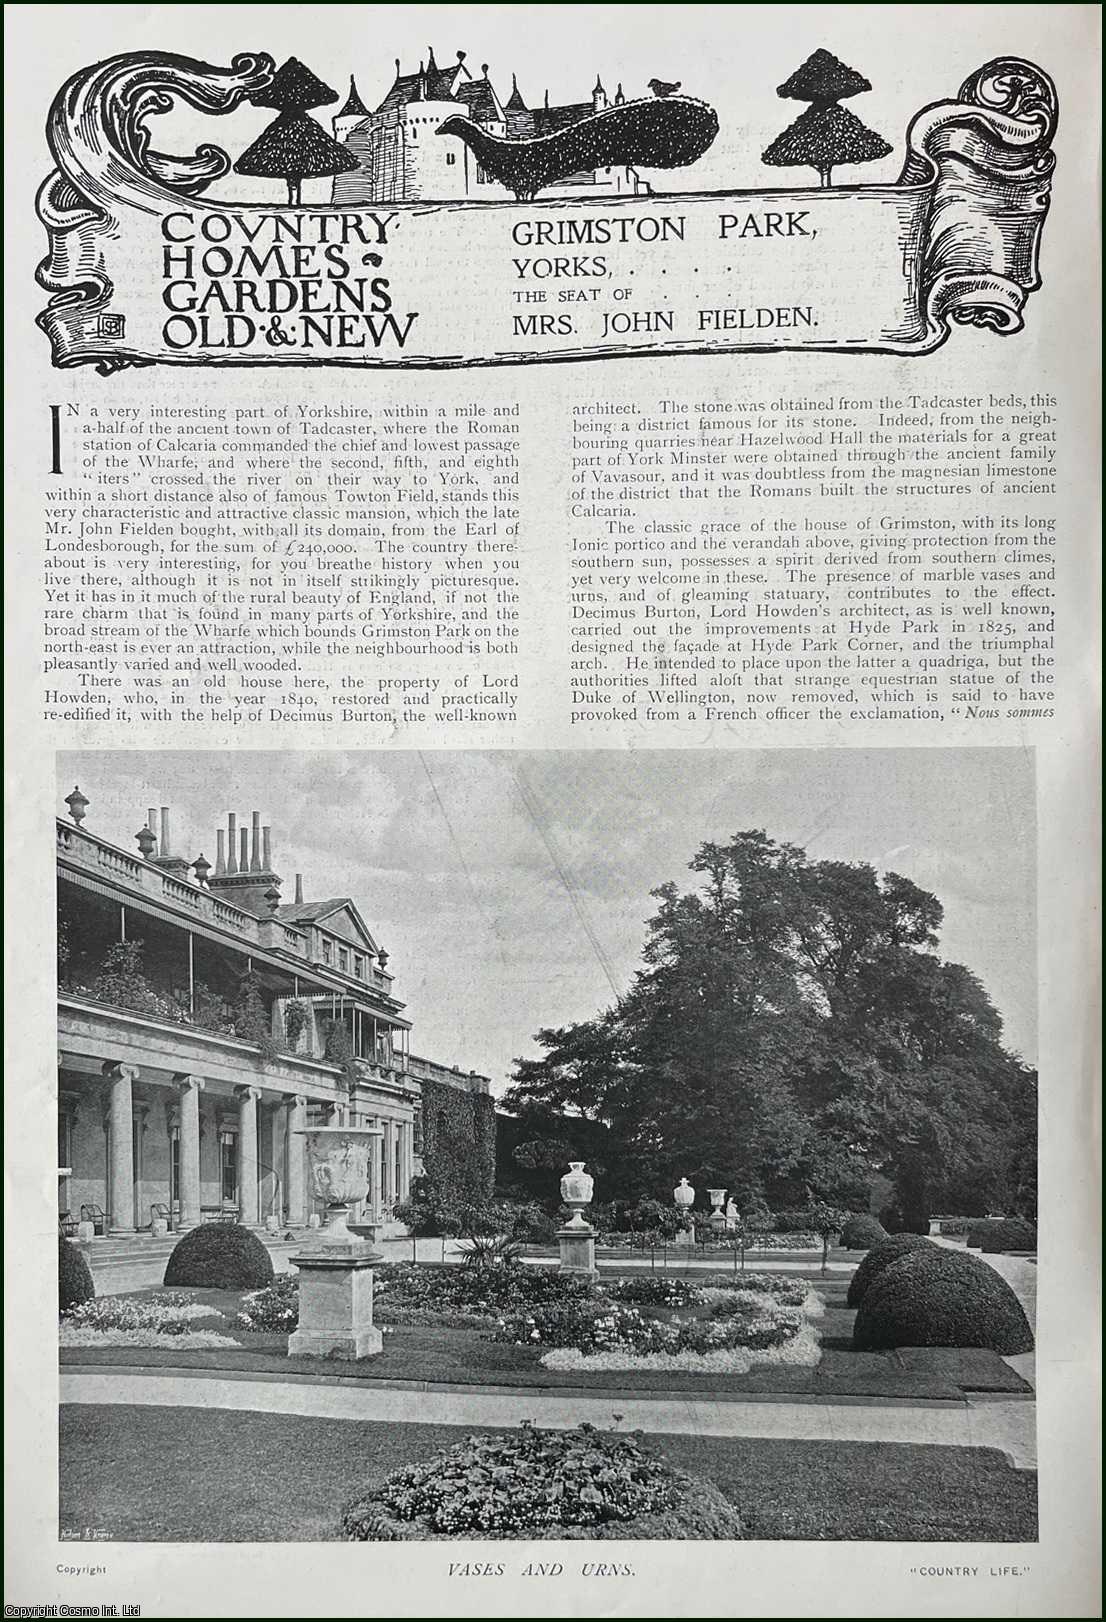 Country Life Magazine - Grimston Park, Yorks. The Seat of Mrs. John Fielden. Several pictures and accompanying text, removed from an original issue of Country Life Magazine, 1901.